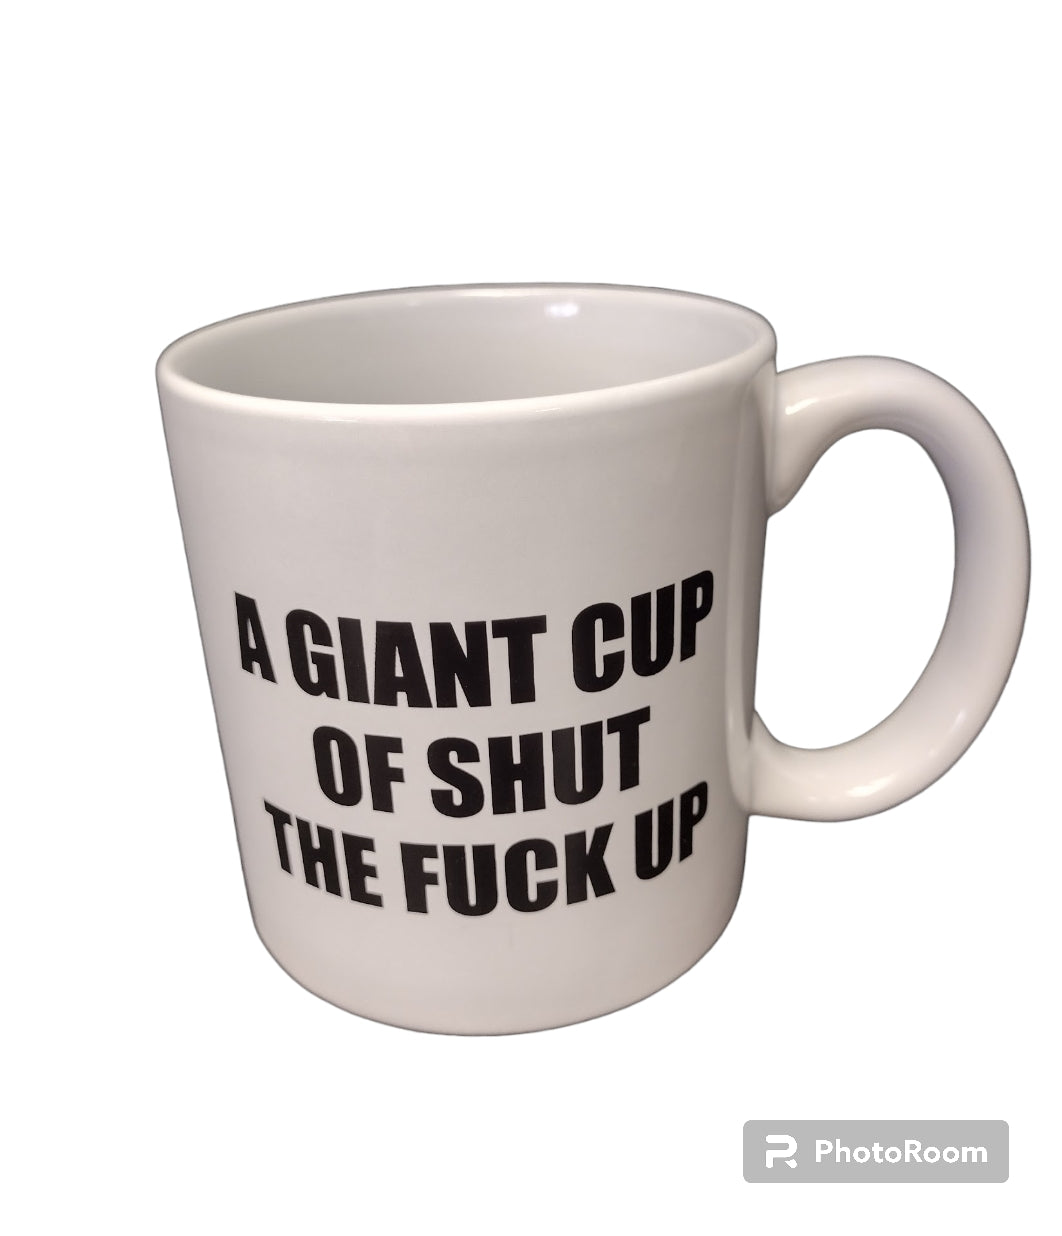 Giant Cup of STFU